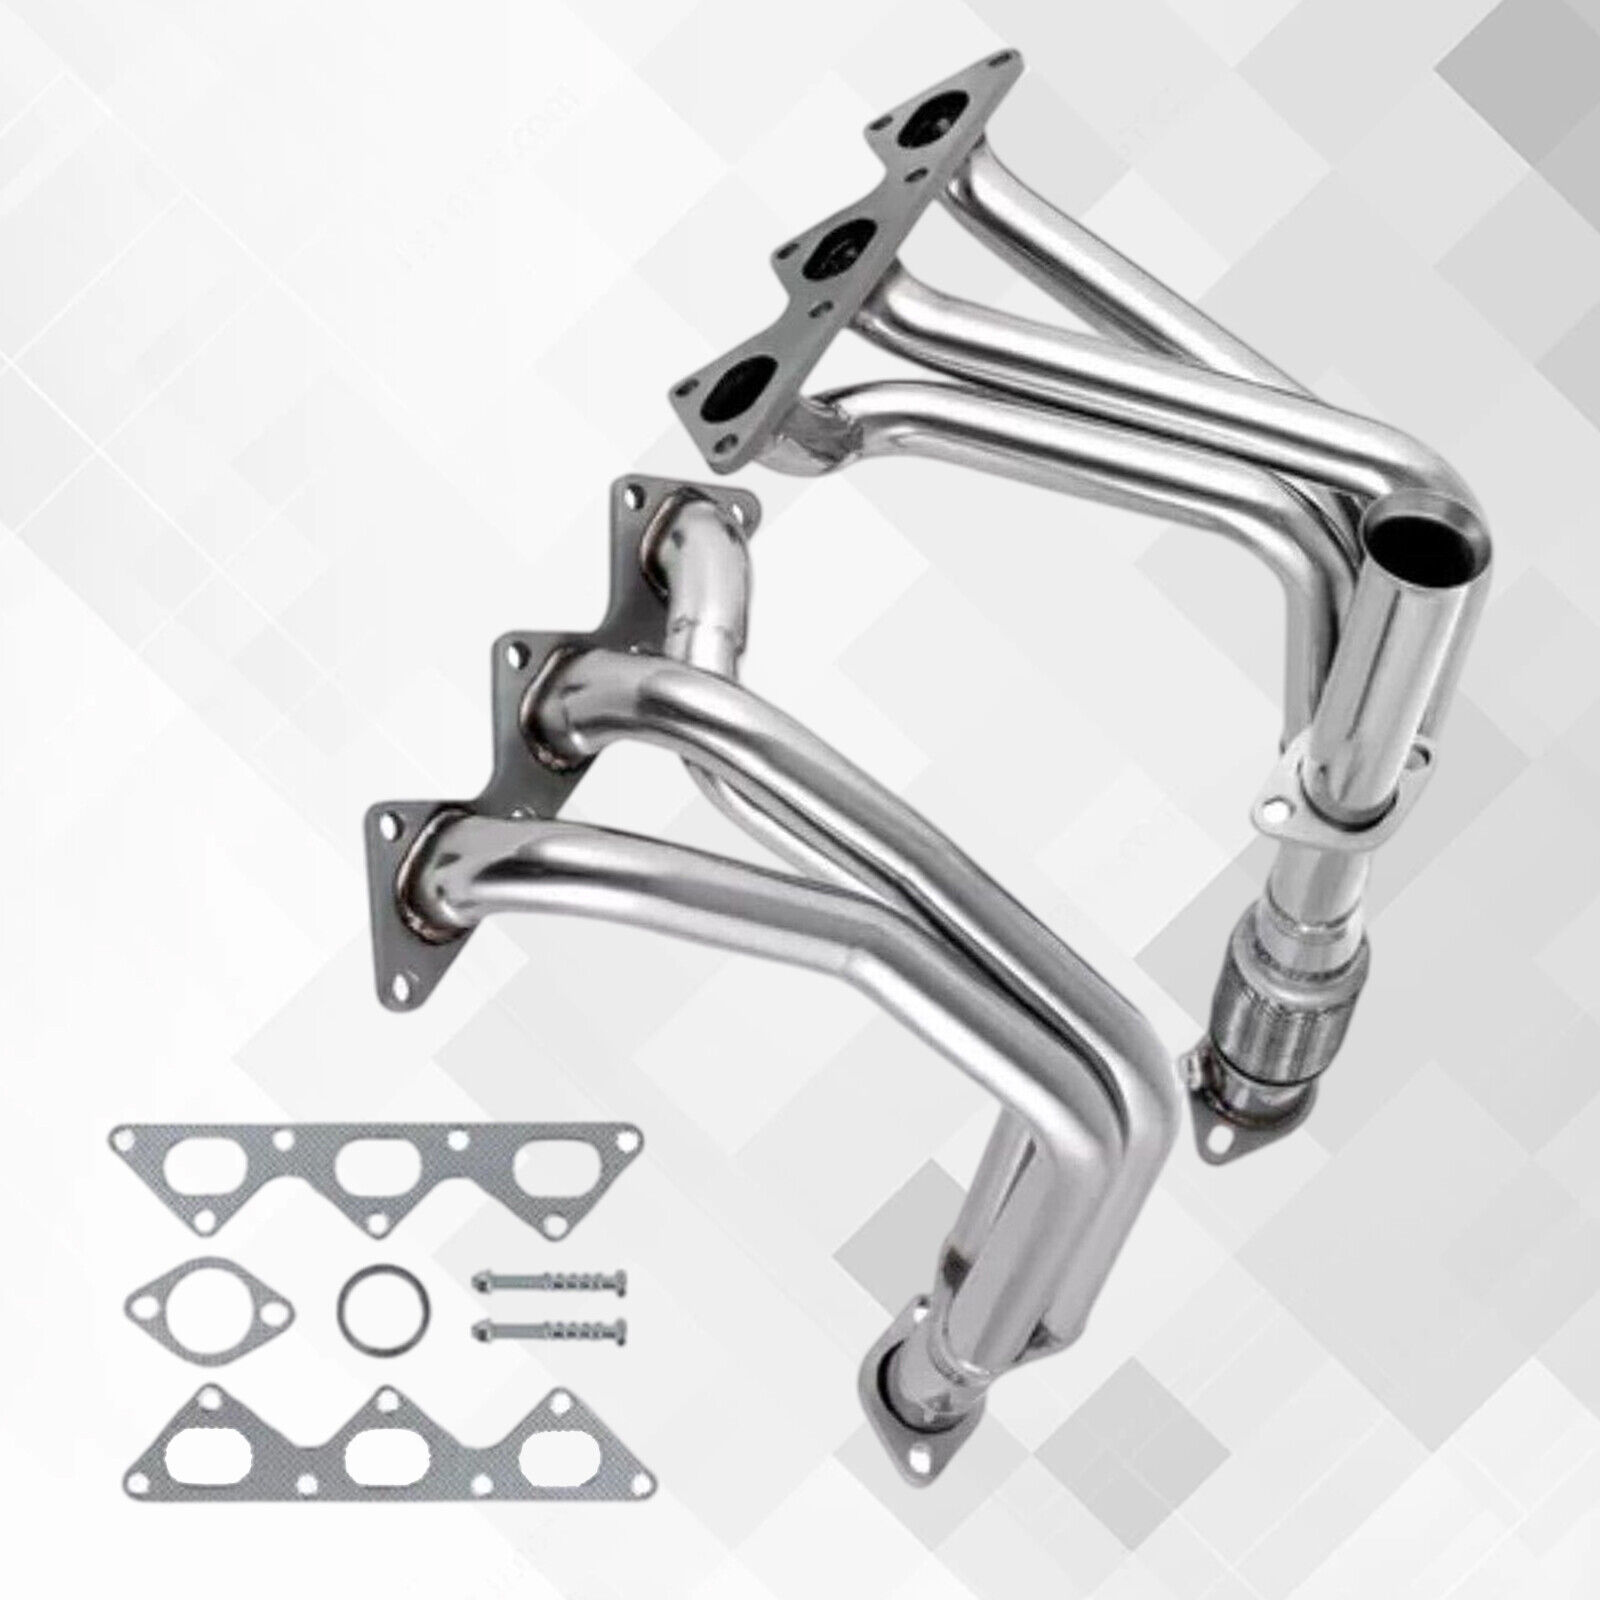 Stainless Exhaust Header For 1991-99 Mitsubishi 3000GT/91-96 Stealth 3.0 N/A VpQ